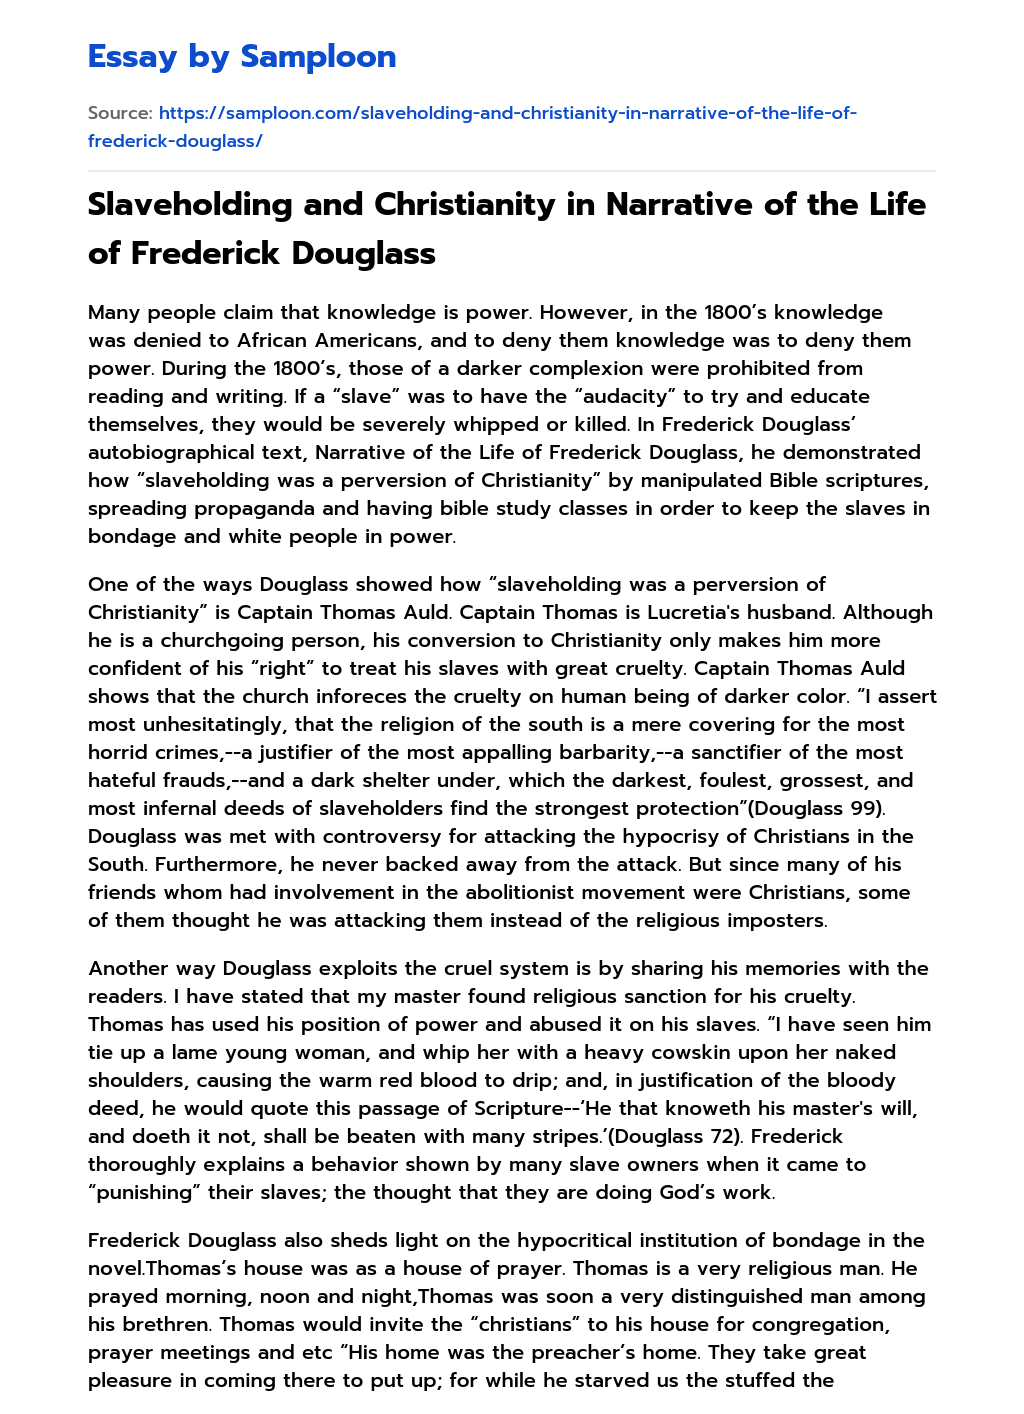 Slaveholding and Christianity in Narrative of the Life of Frederick Douglass essay